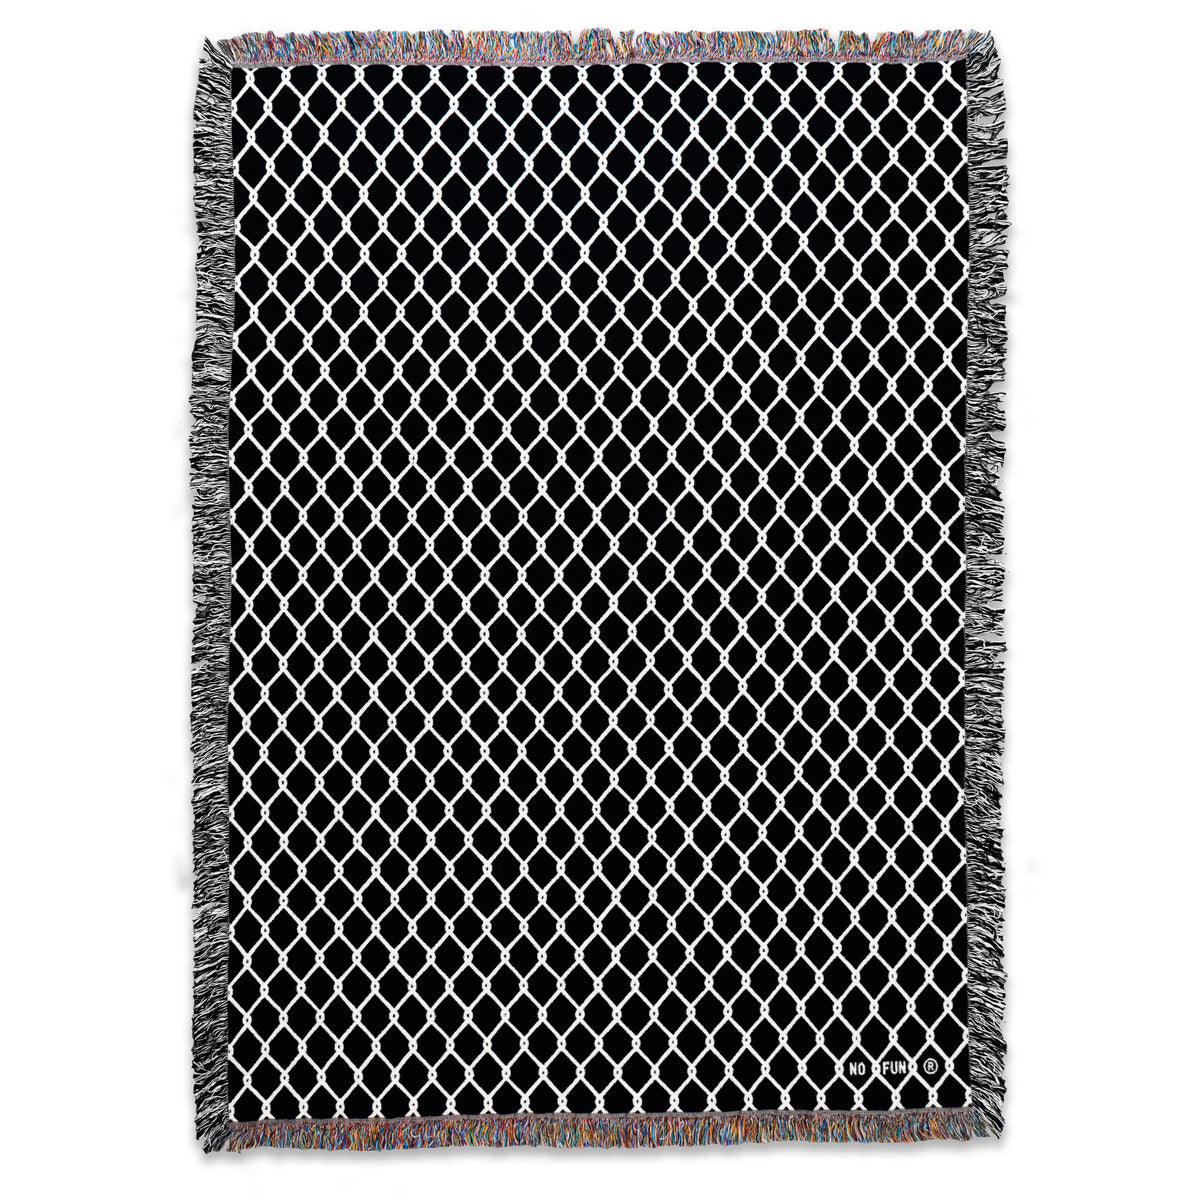 The original "Chainlink" Woven Blanket from No Fun®.  Woven blanket is black, with white chainlink design and is photographed flat against a white background.  There is a small "No Fun®" logo in the bottom right-hand corner of the blanket.